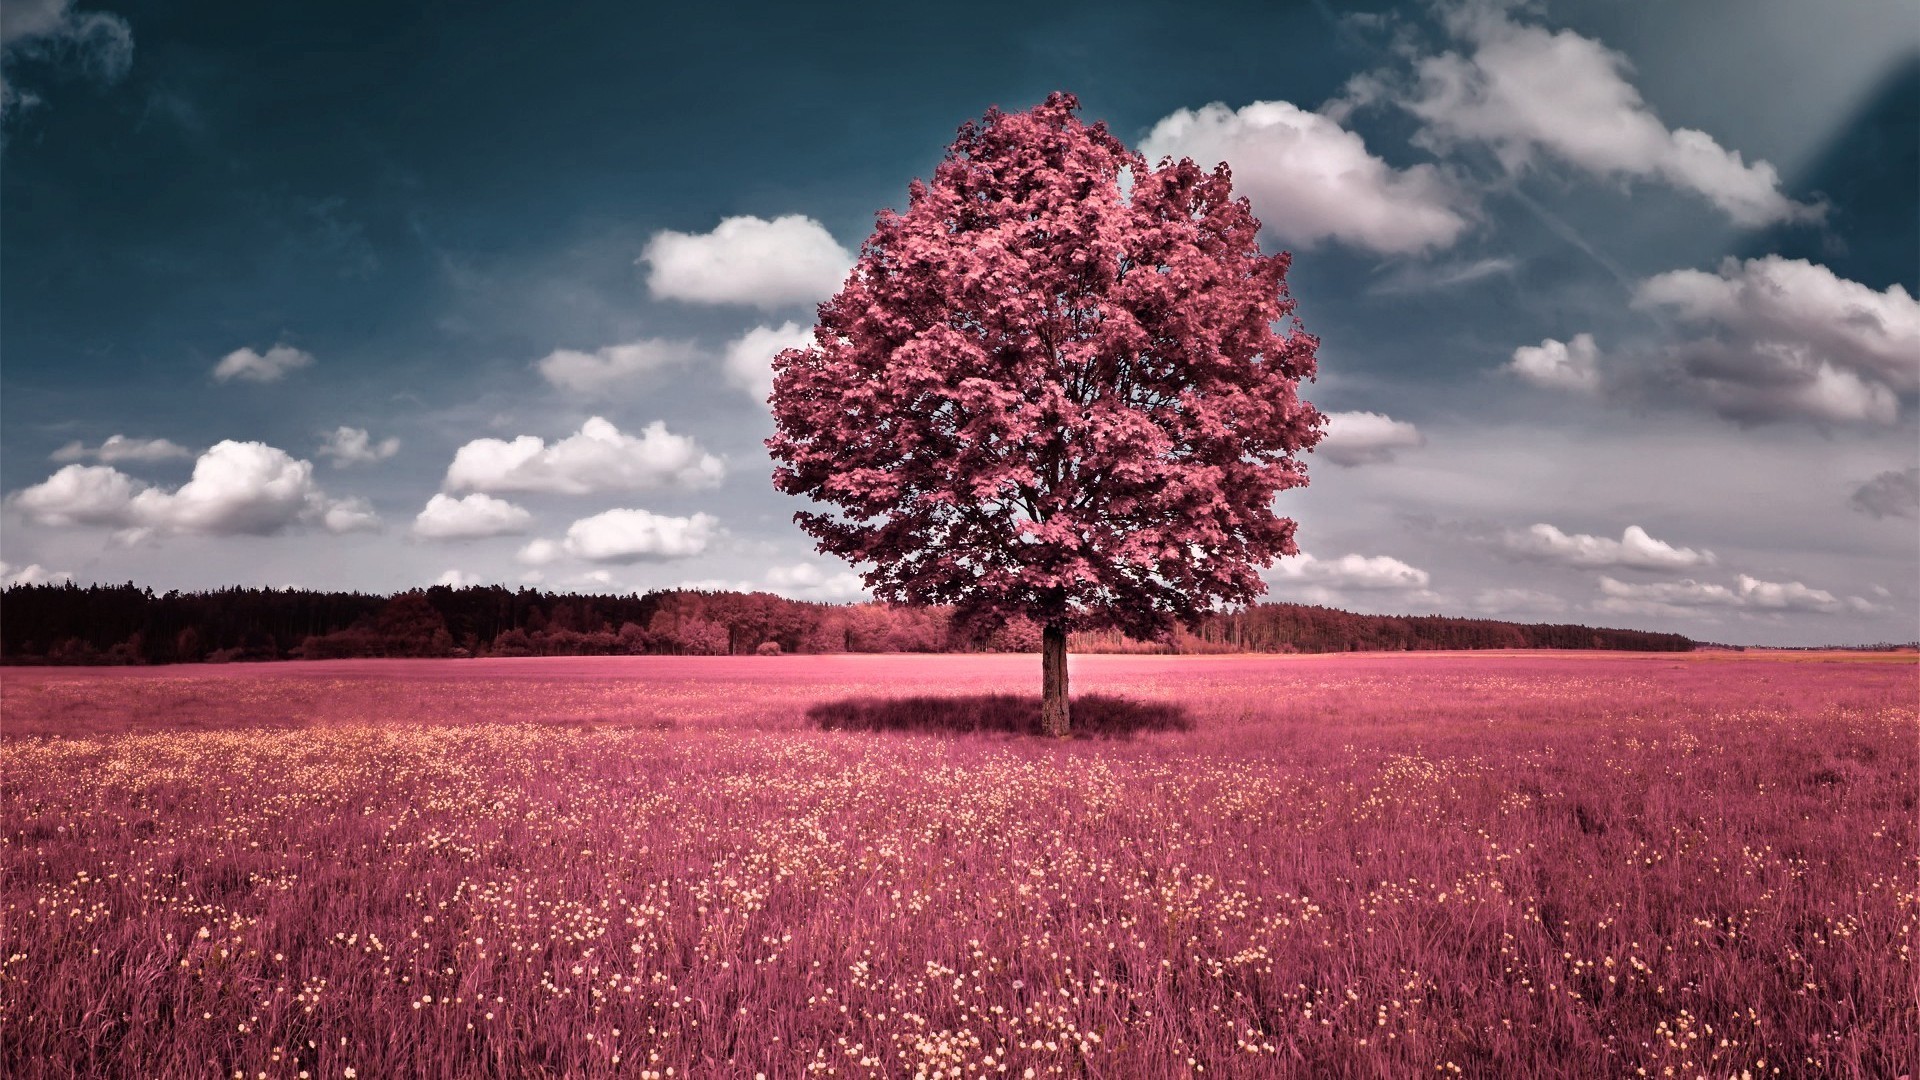 General 1920x1080 selective coloring trees grass sky clouds field landscape outdoors plants flowers